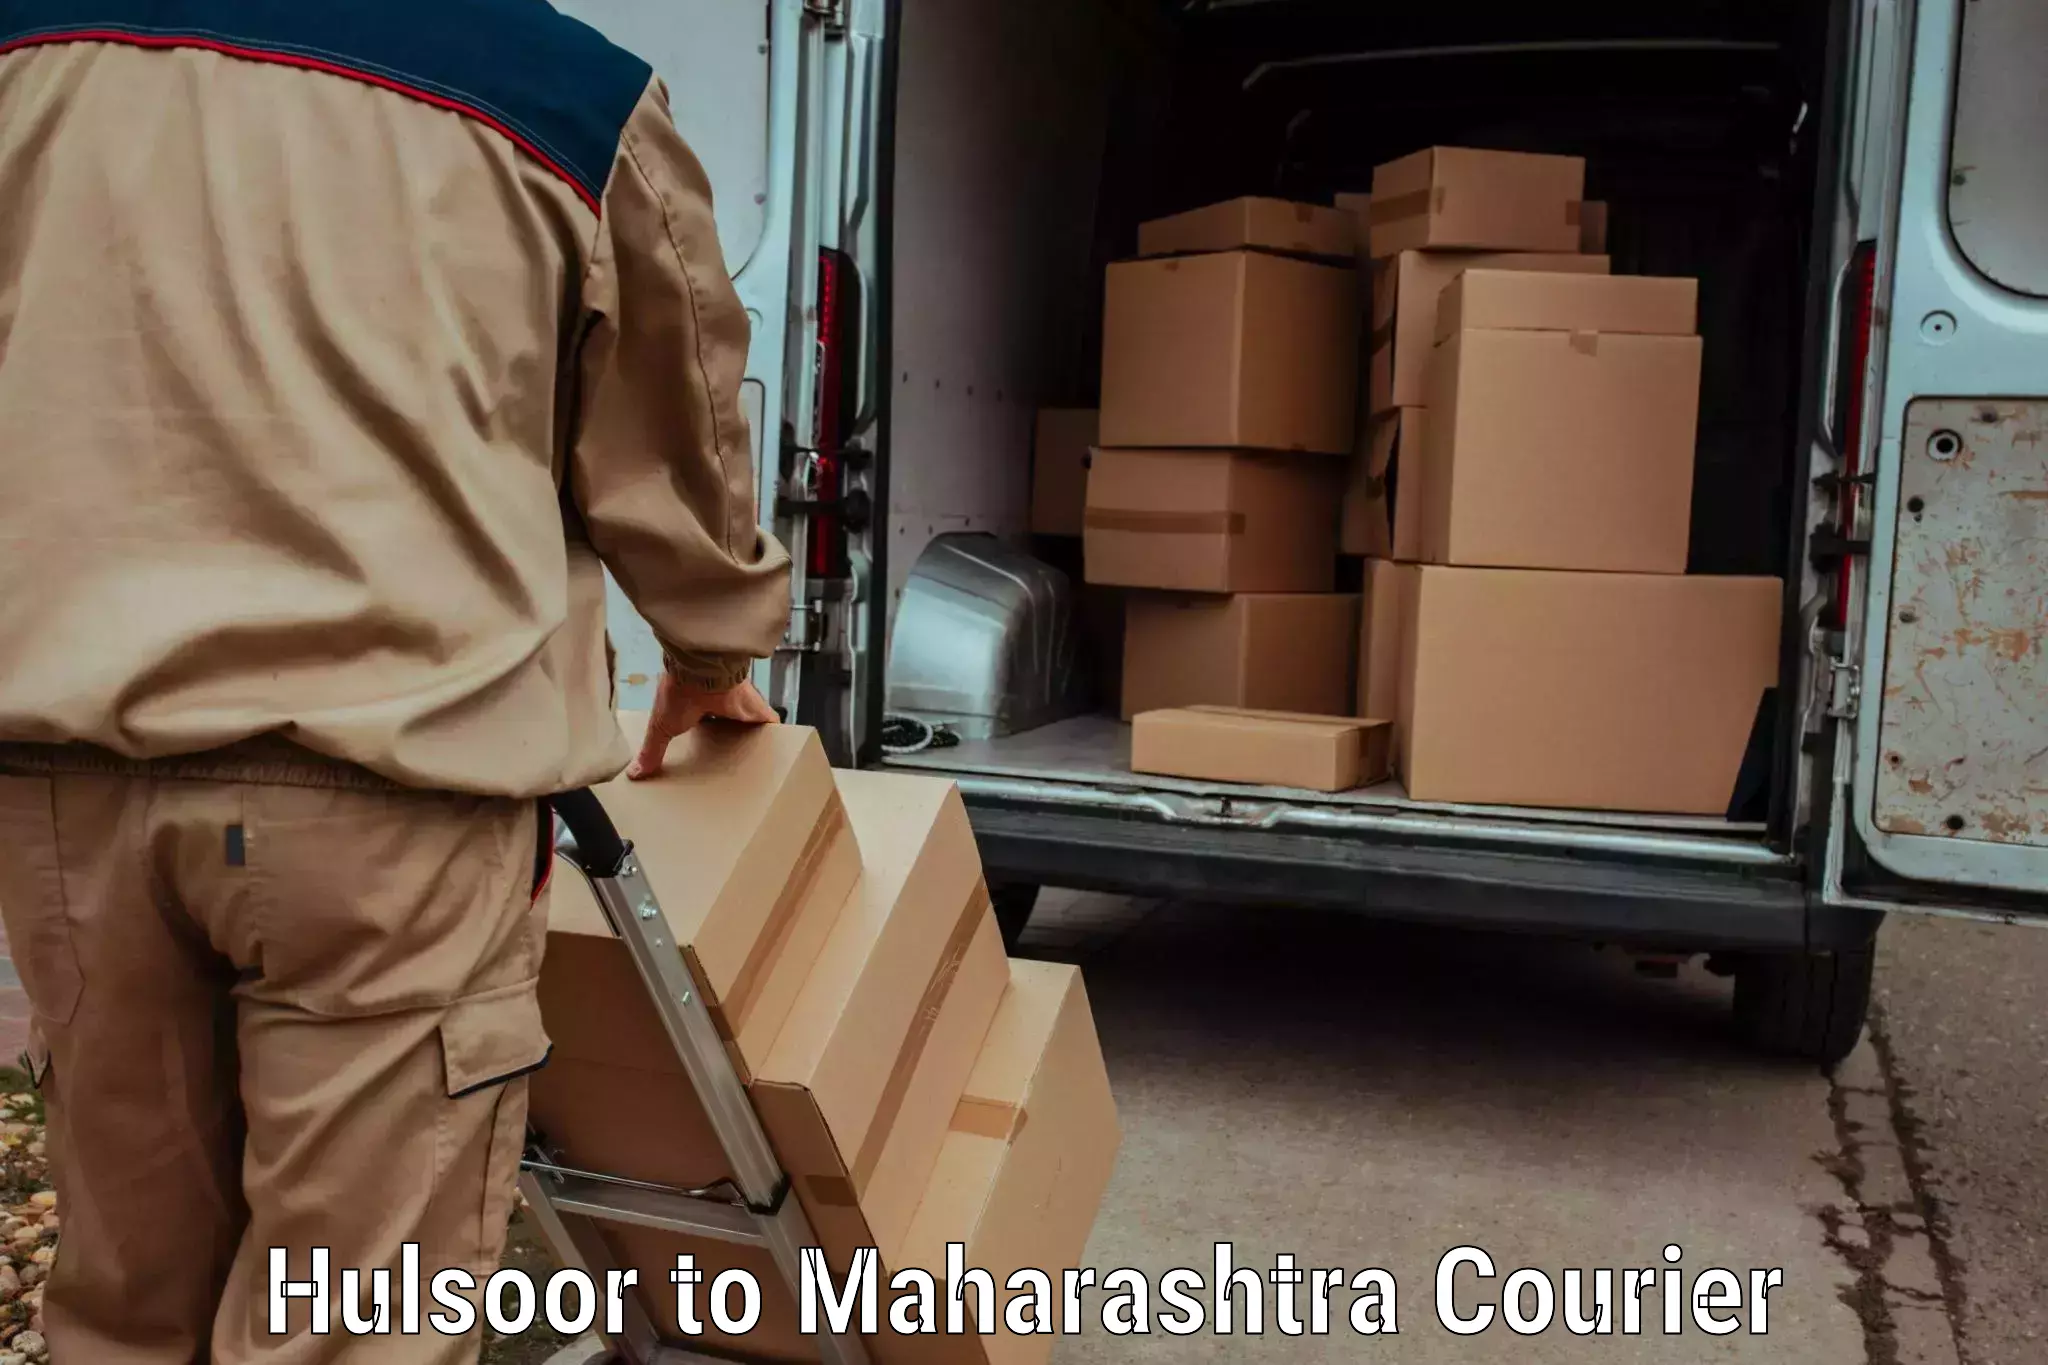 Global courier networks Hulsoor to Loha Nanded